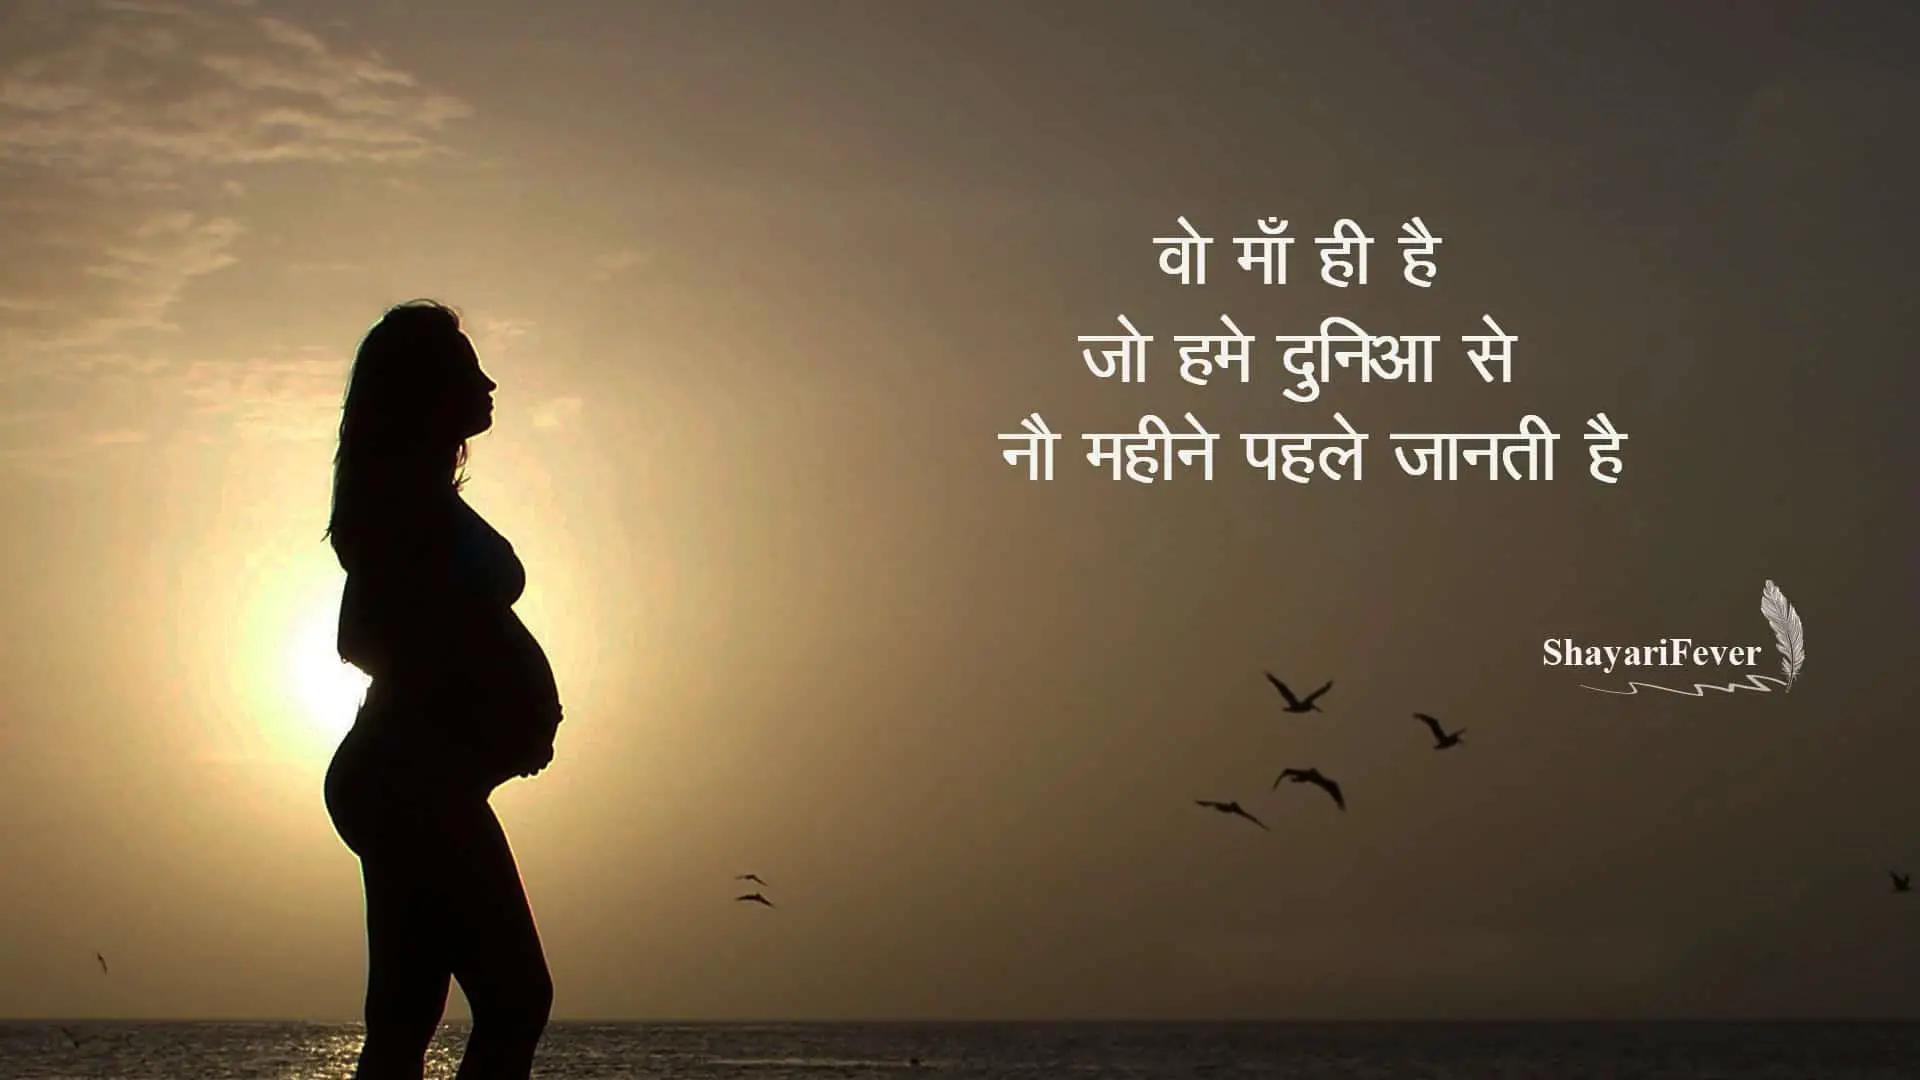 mother's quotes images download